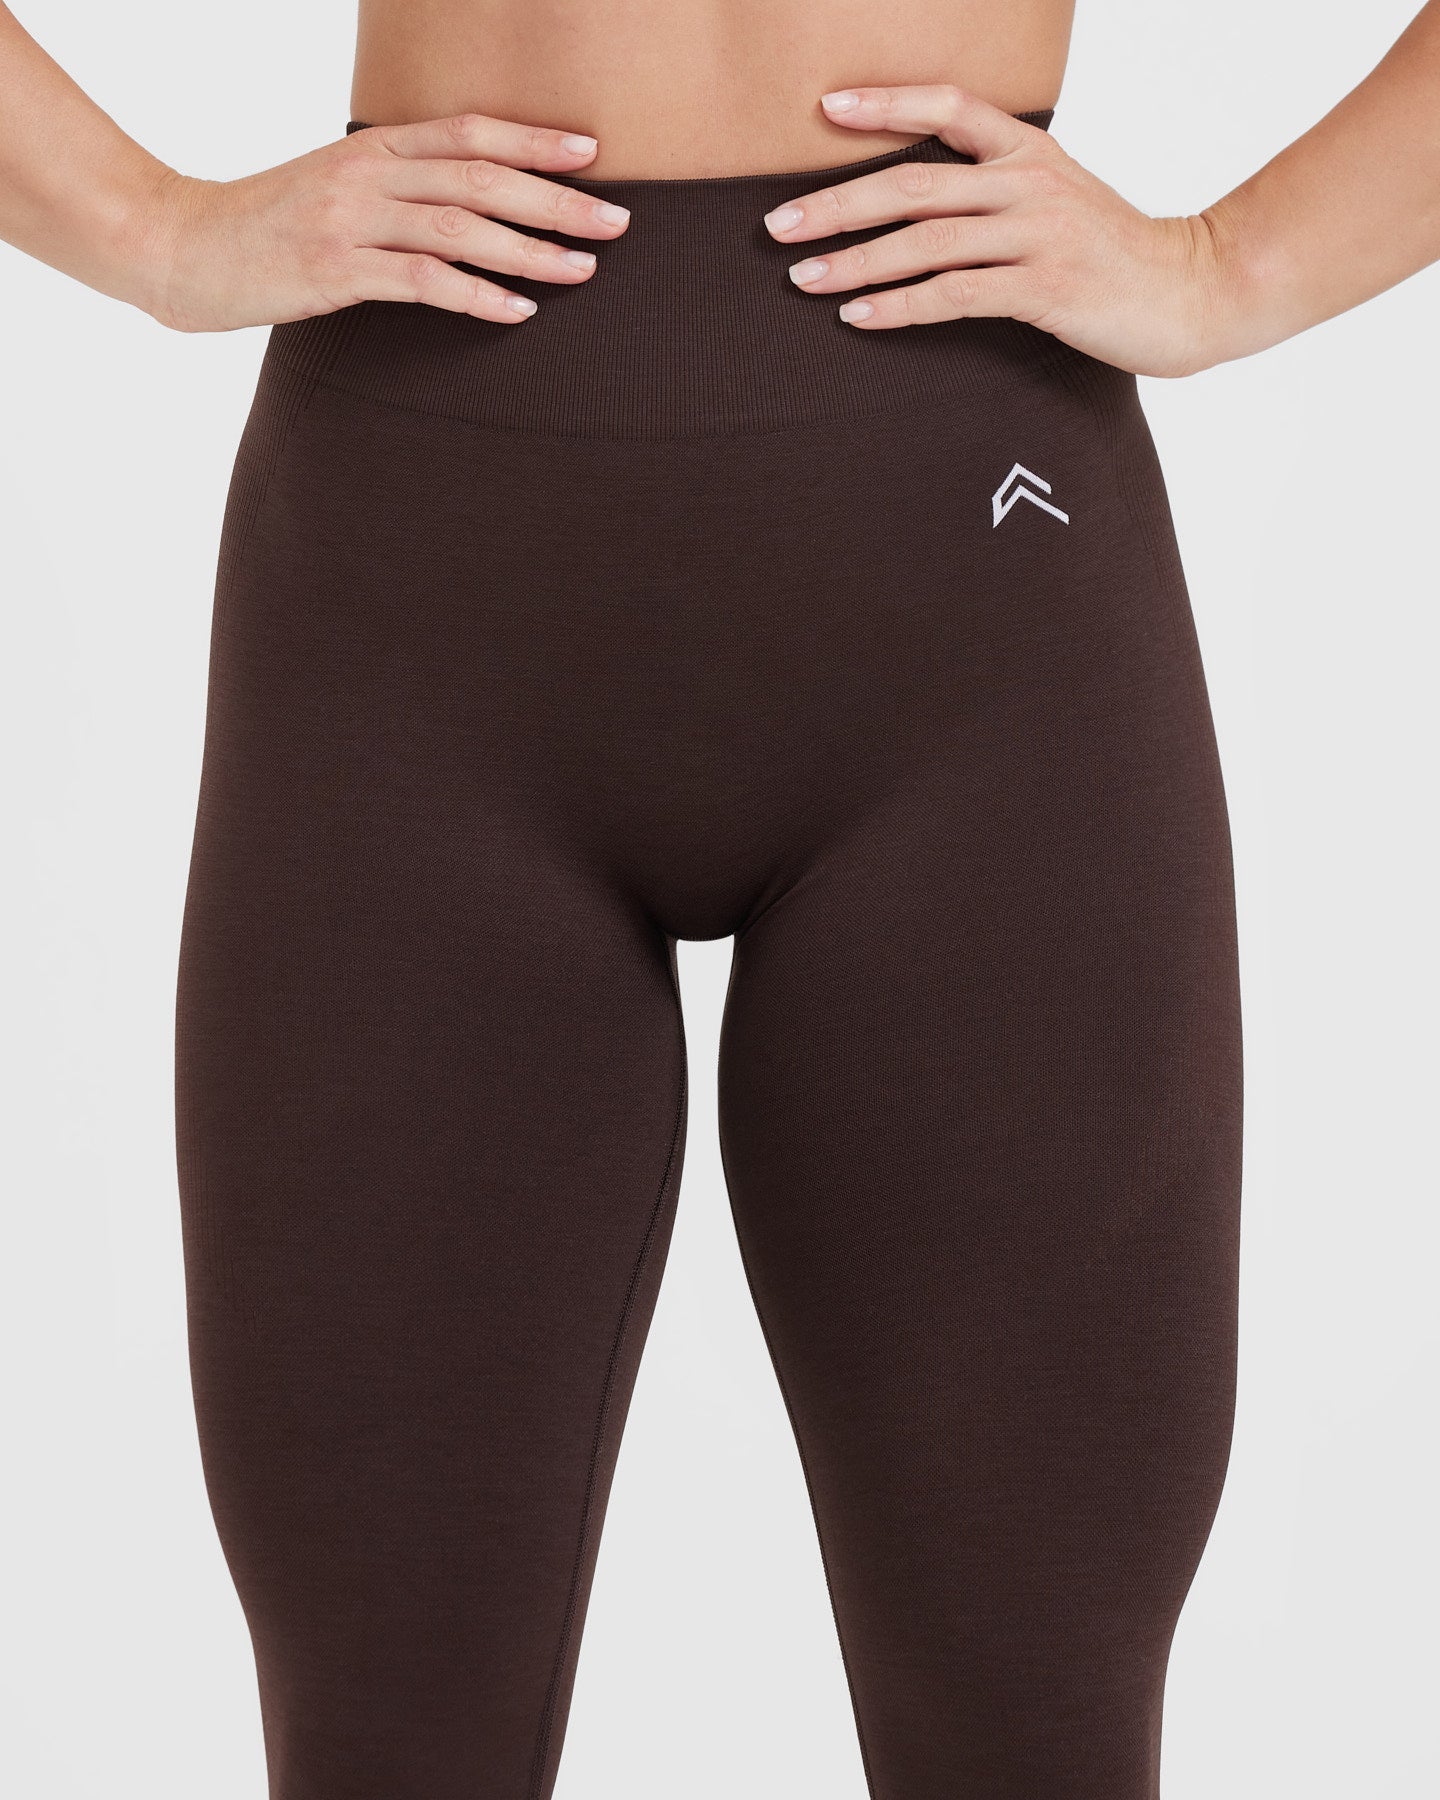 US 2.0 Cocoa Active | 70% Marl Seamless Oner Leggings Classic